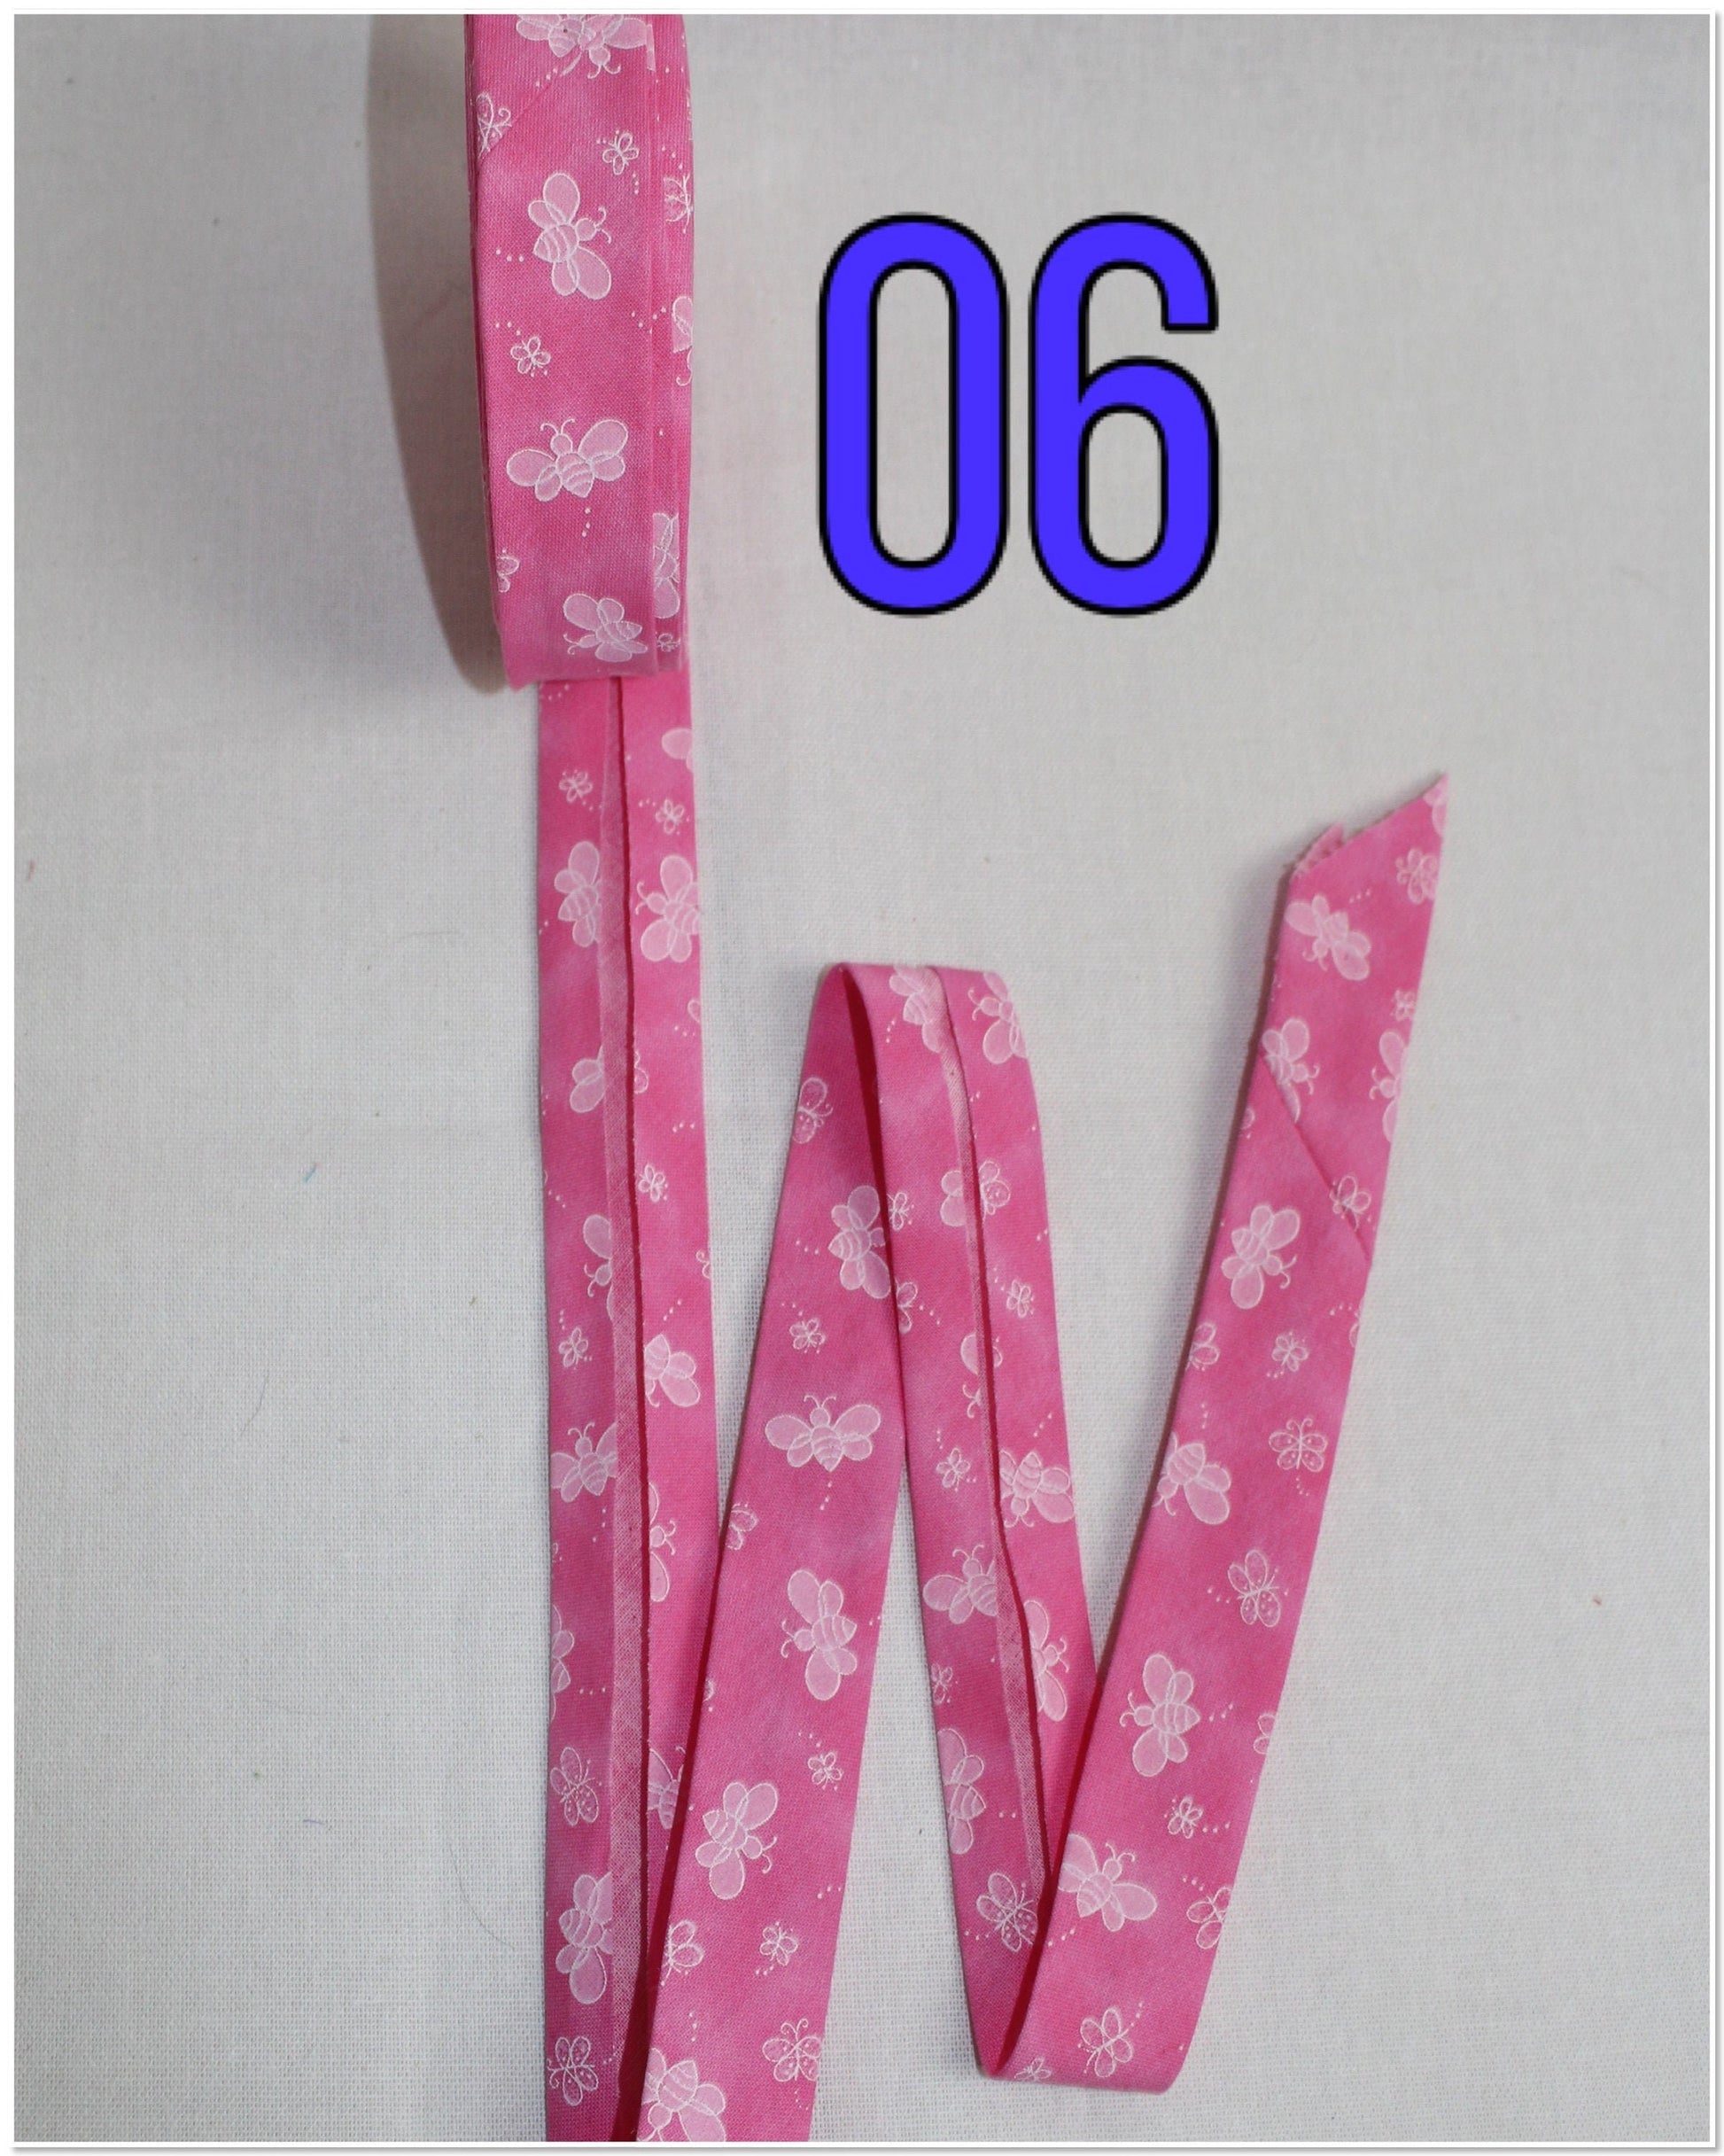 Bias Binding (Tape) 25mm, Cotton, Single Fold, pink, purple, blue, grey bees. Fusible iron on available.